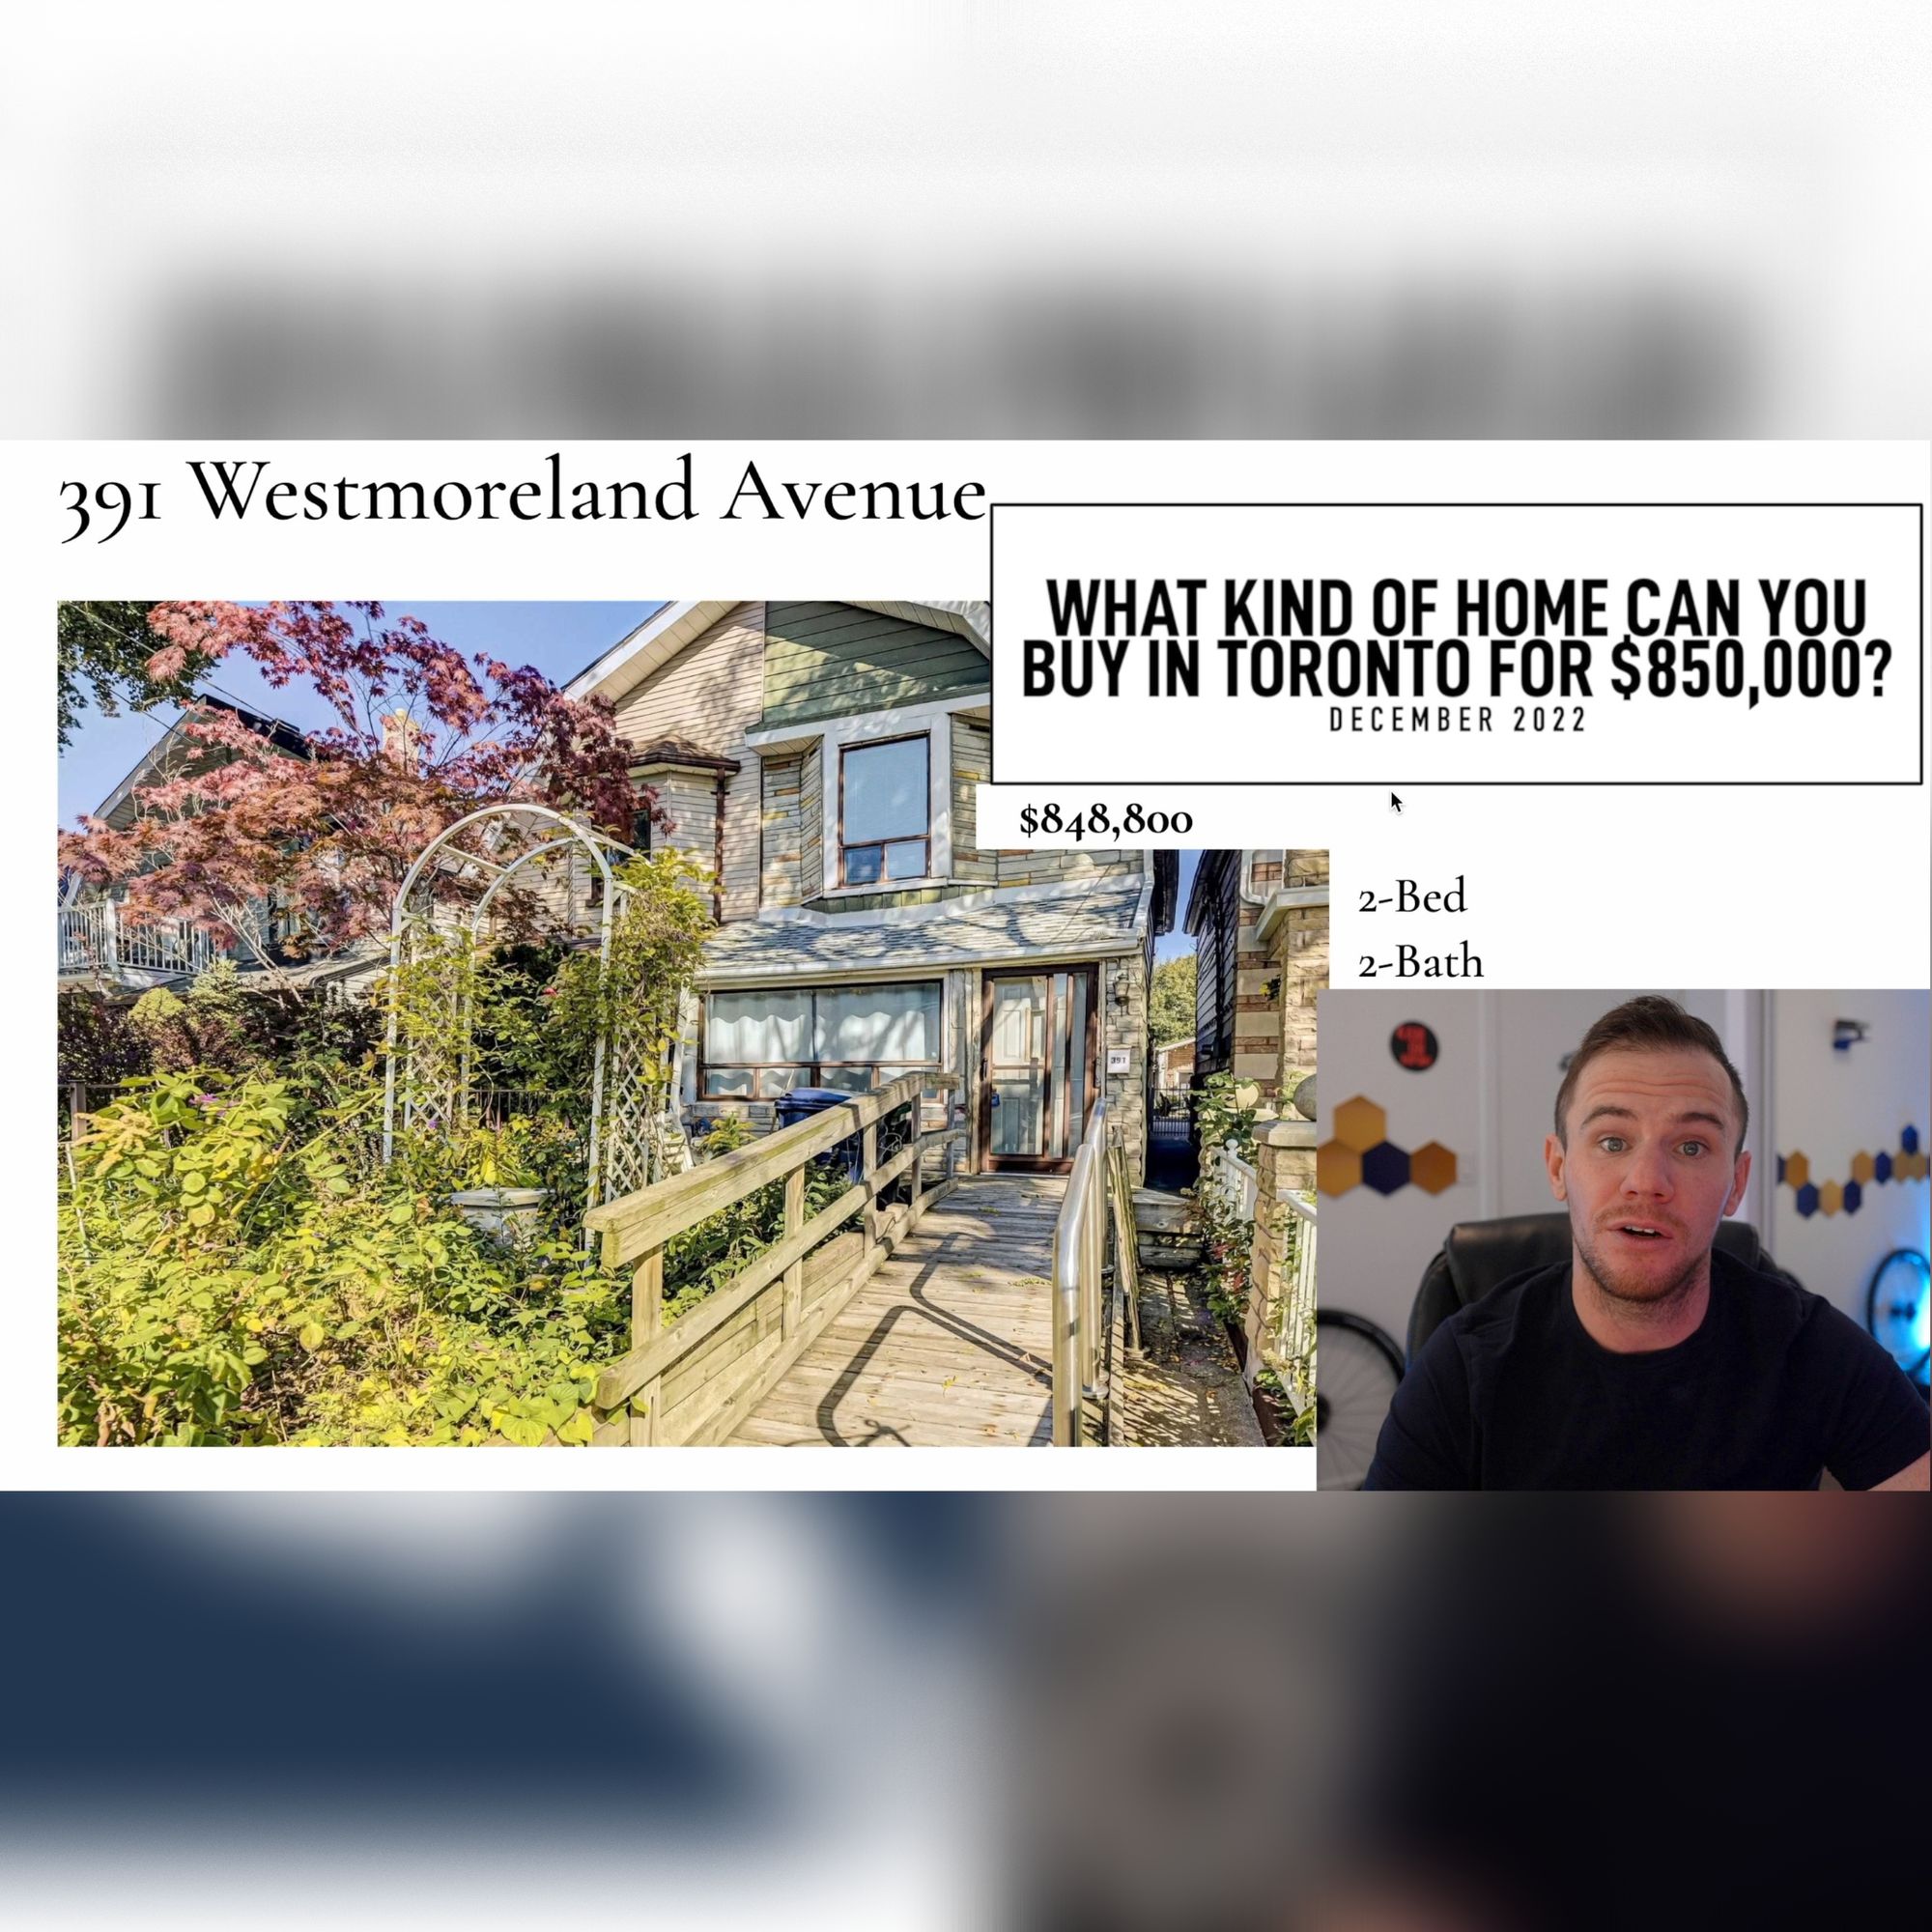 What kind of house can you buy in Toronto for $850,000? | 391 Westmoreland Ave | December 2022